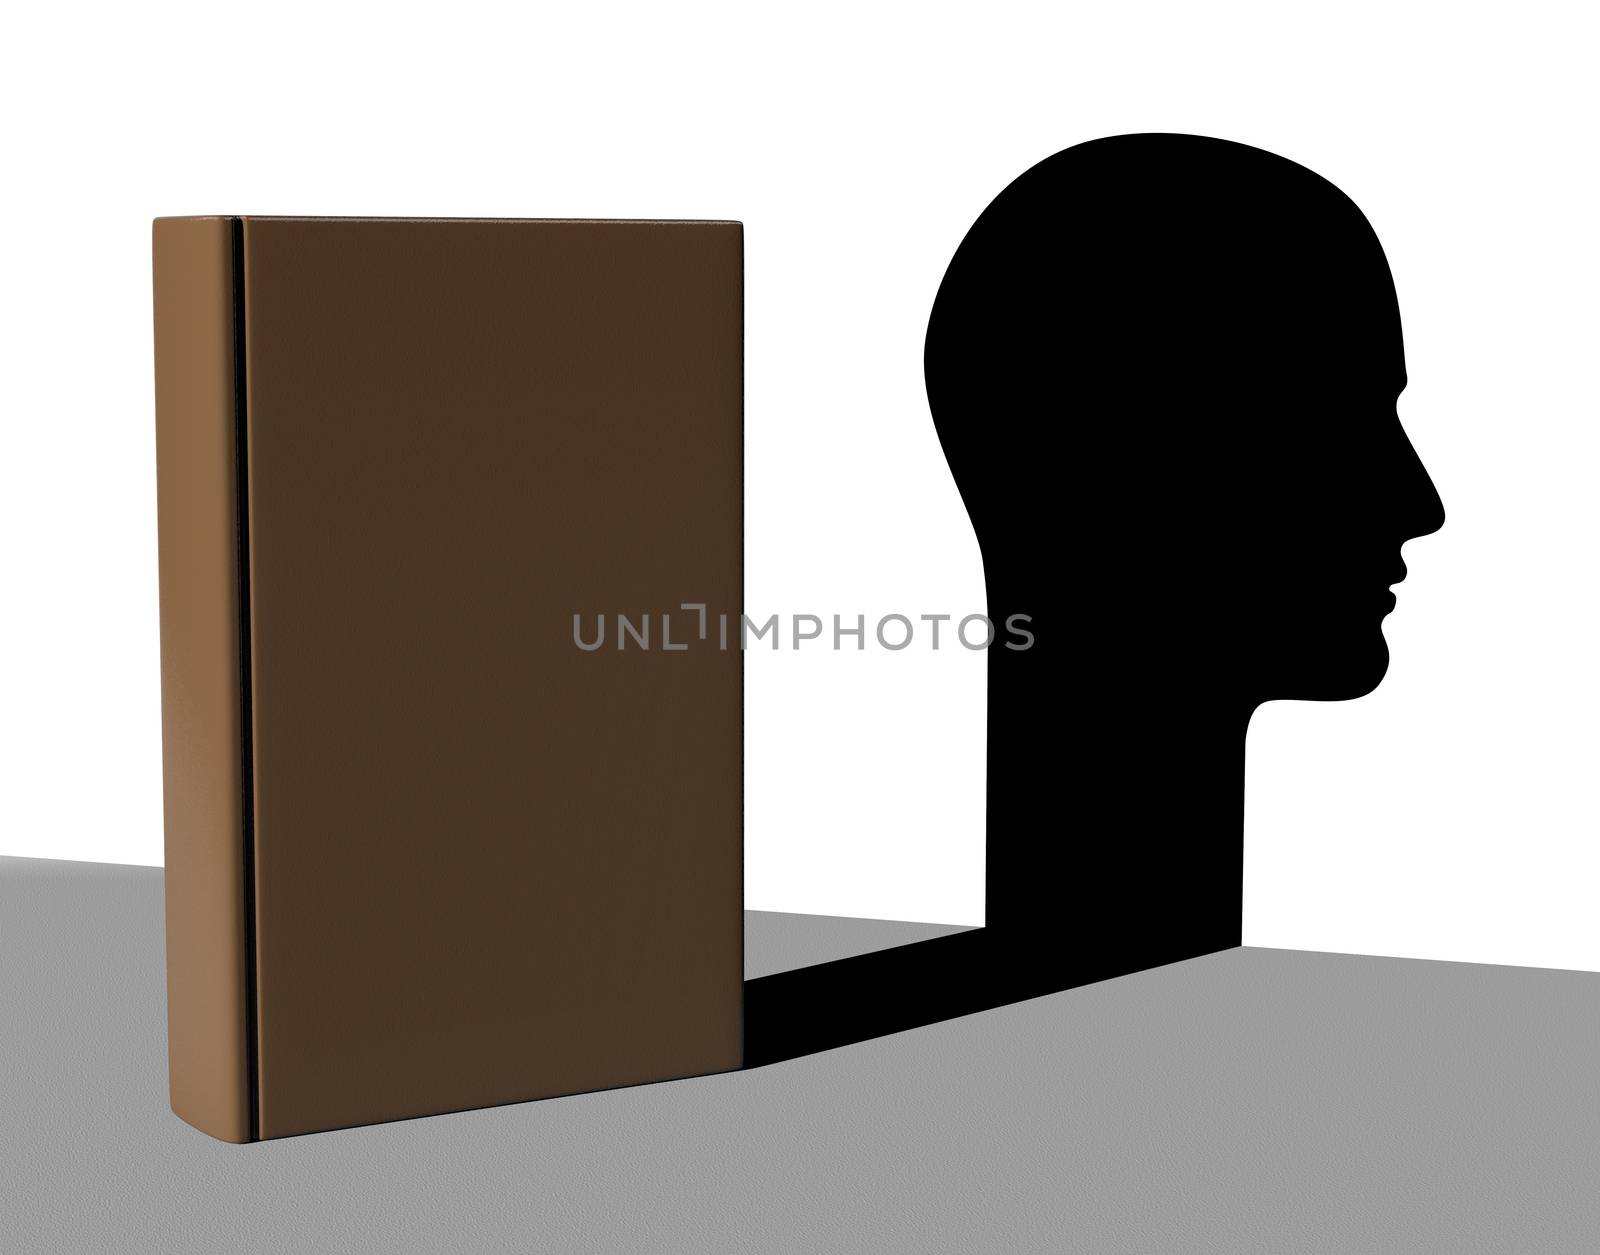 Book with Shadow in the Shape of an Human Head